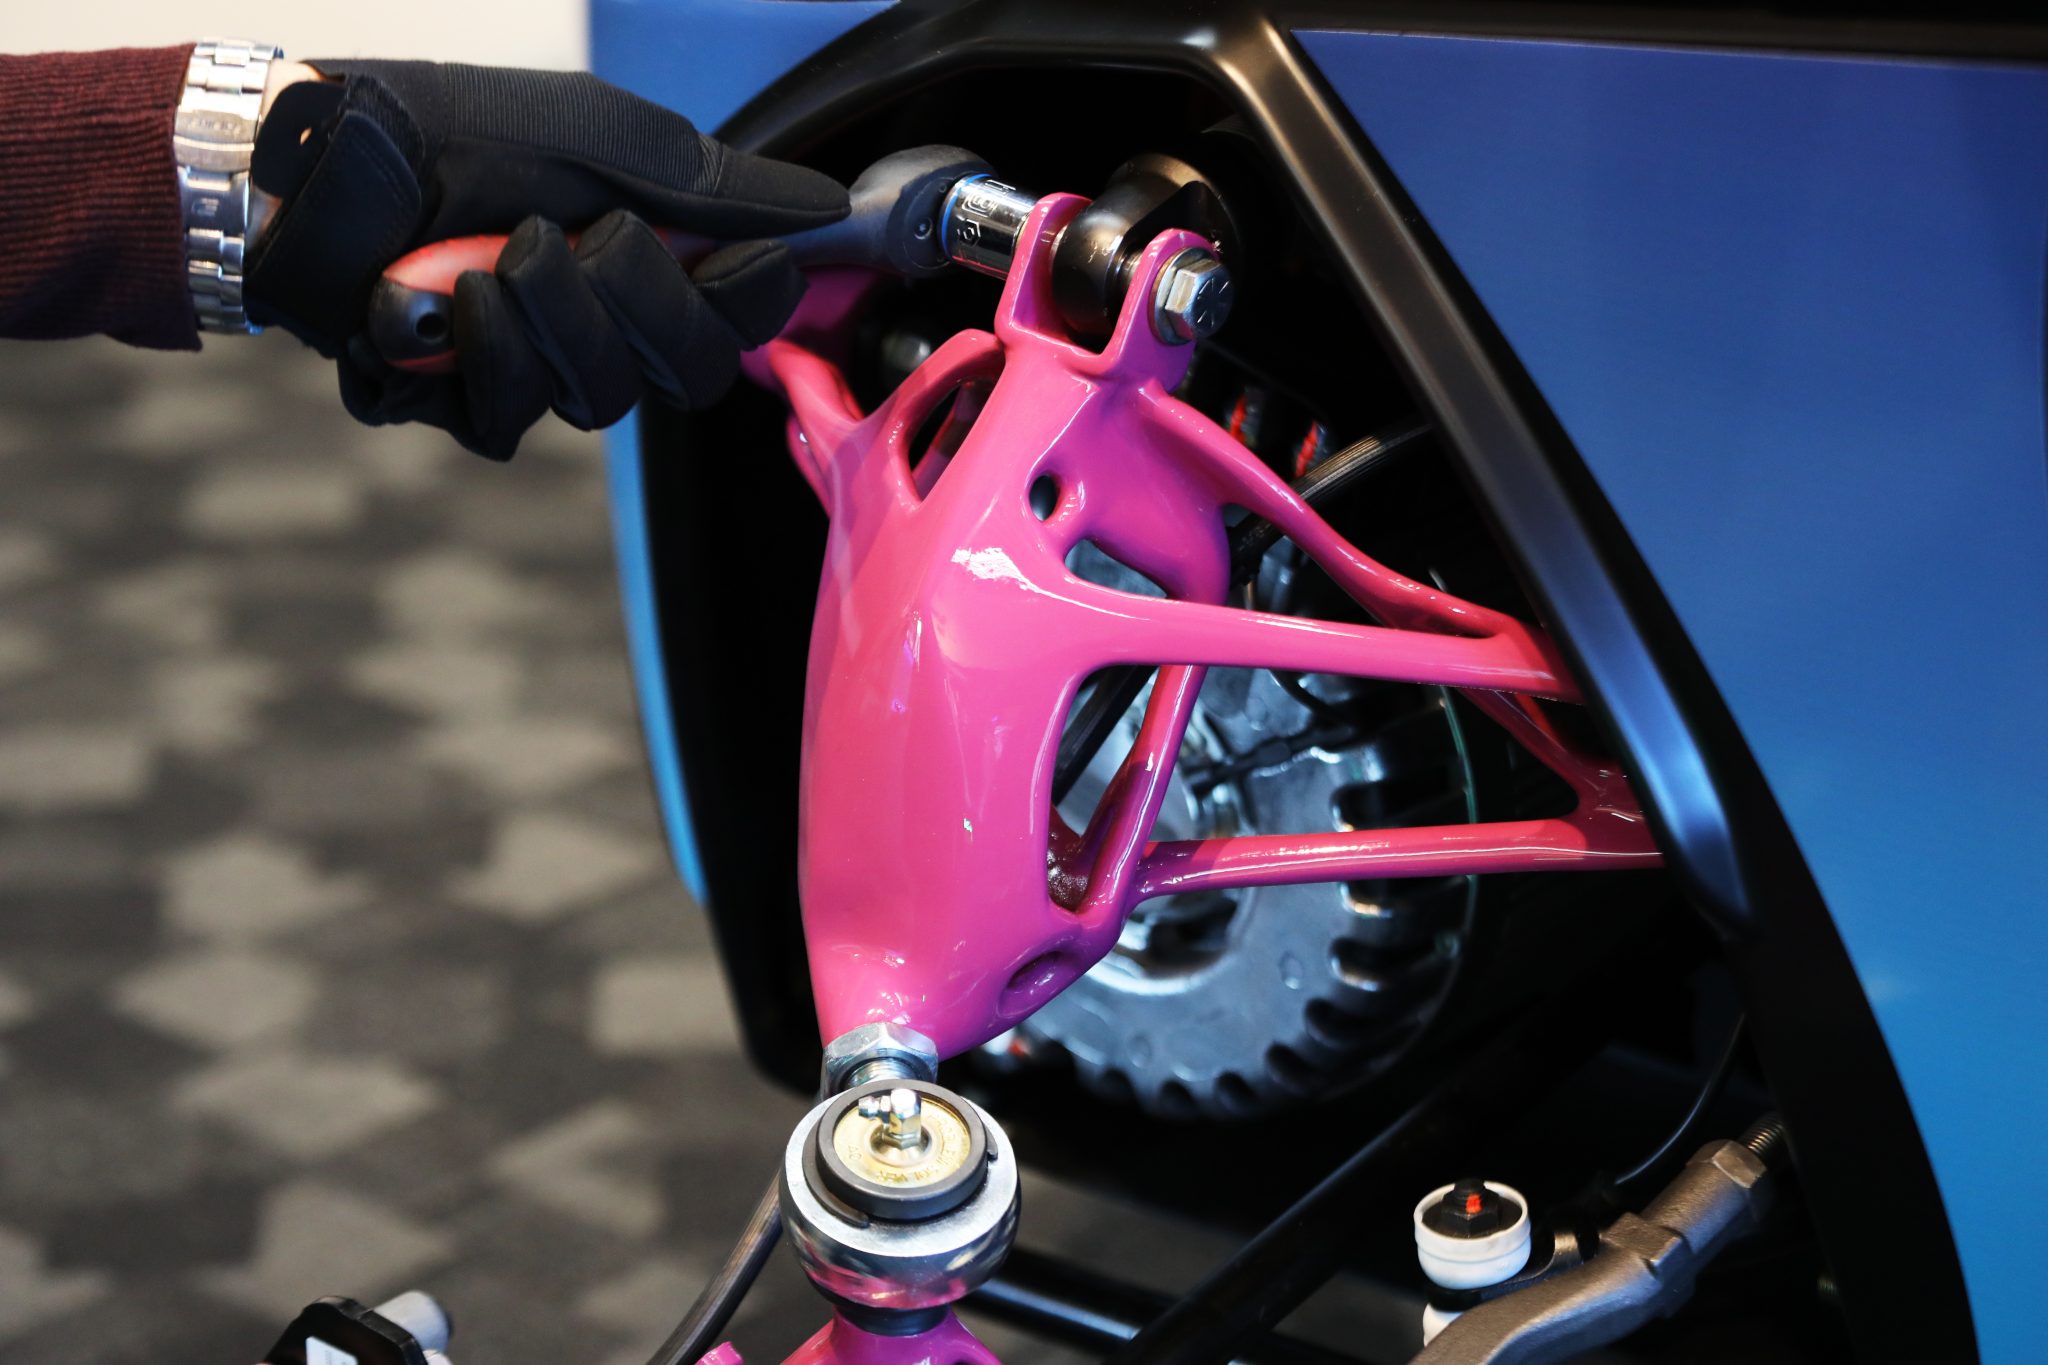 The 3D printed swingarm component created using generative design. Photo via XponentialWorks.